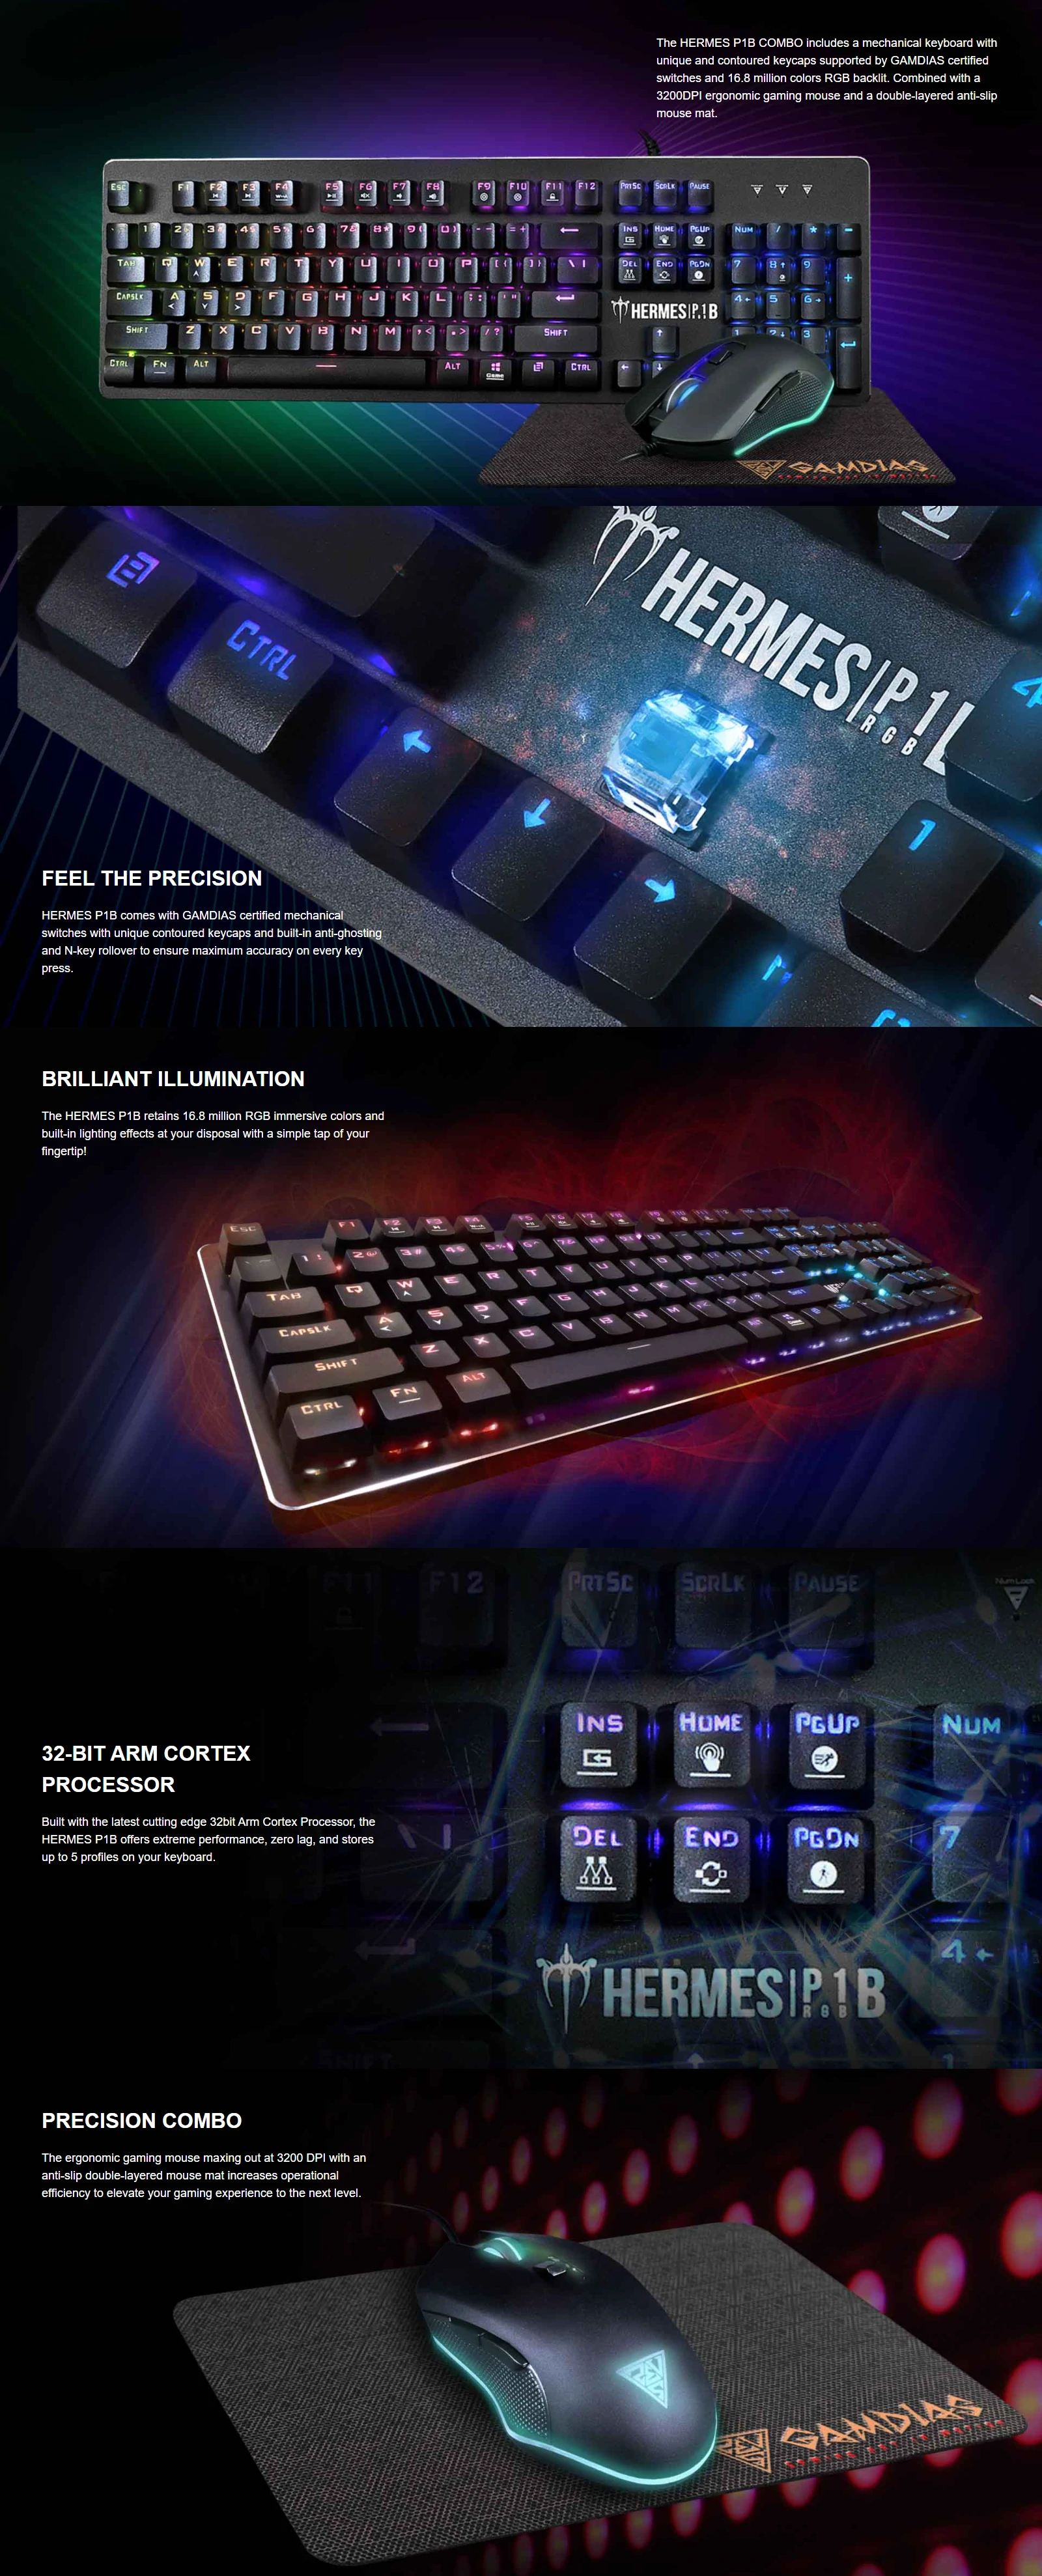 Overview - Specifications - Gamdias - Hermes P1B RGB 3-In-1 Gaming Combo